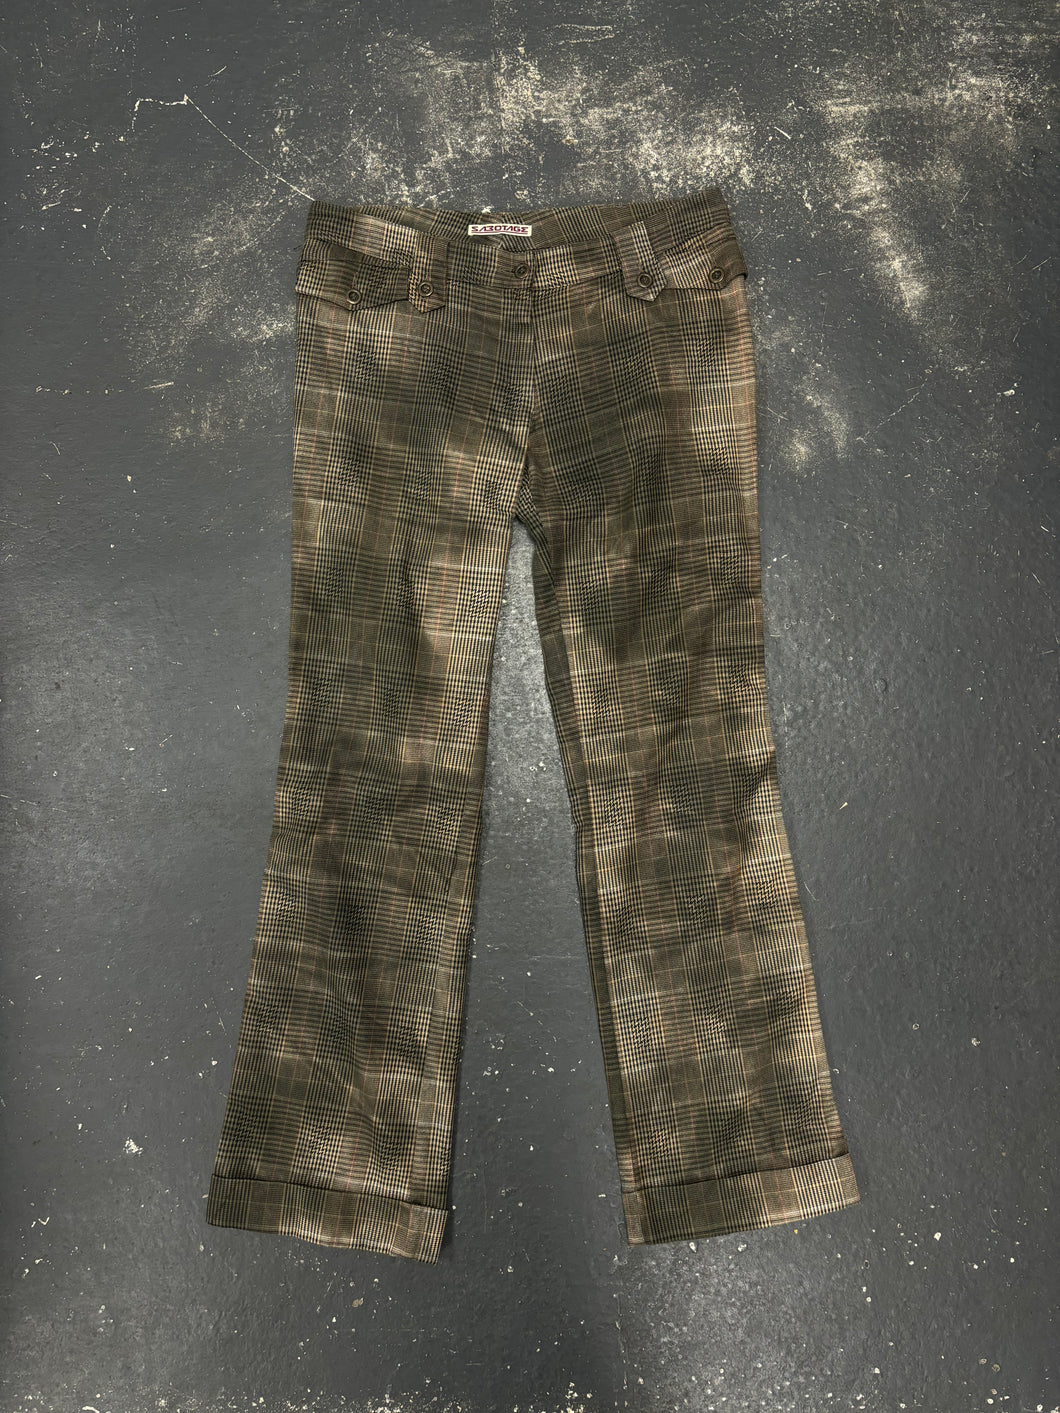 Sabotage Distressed Camo Trousers (34)